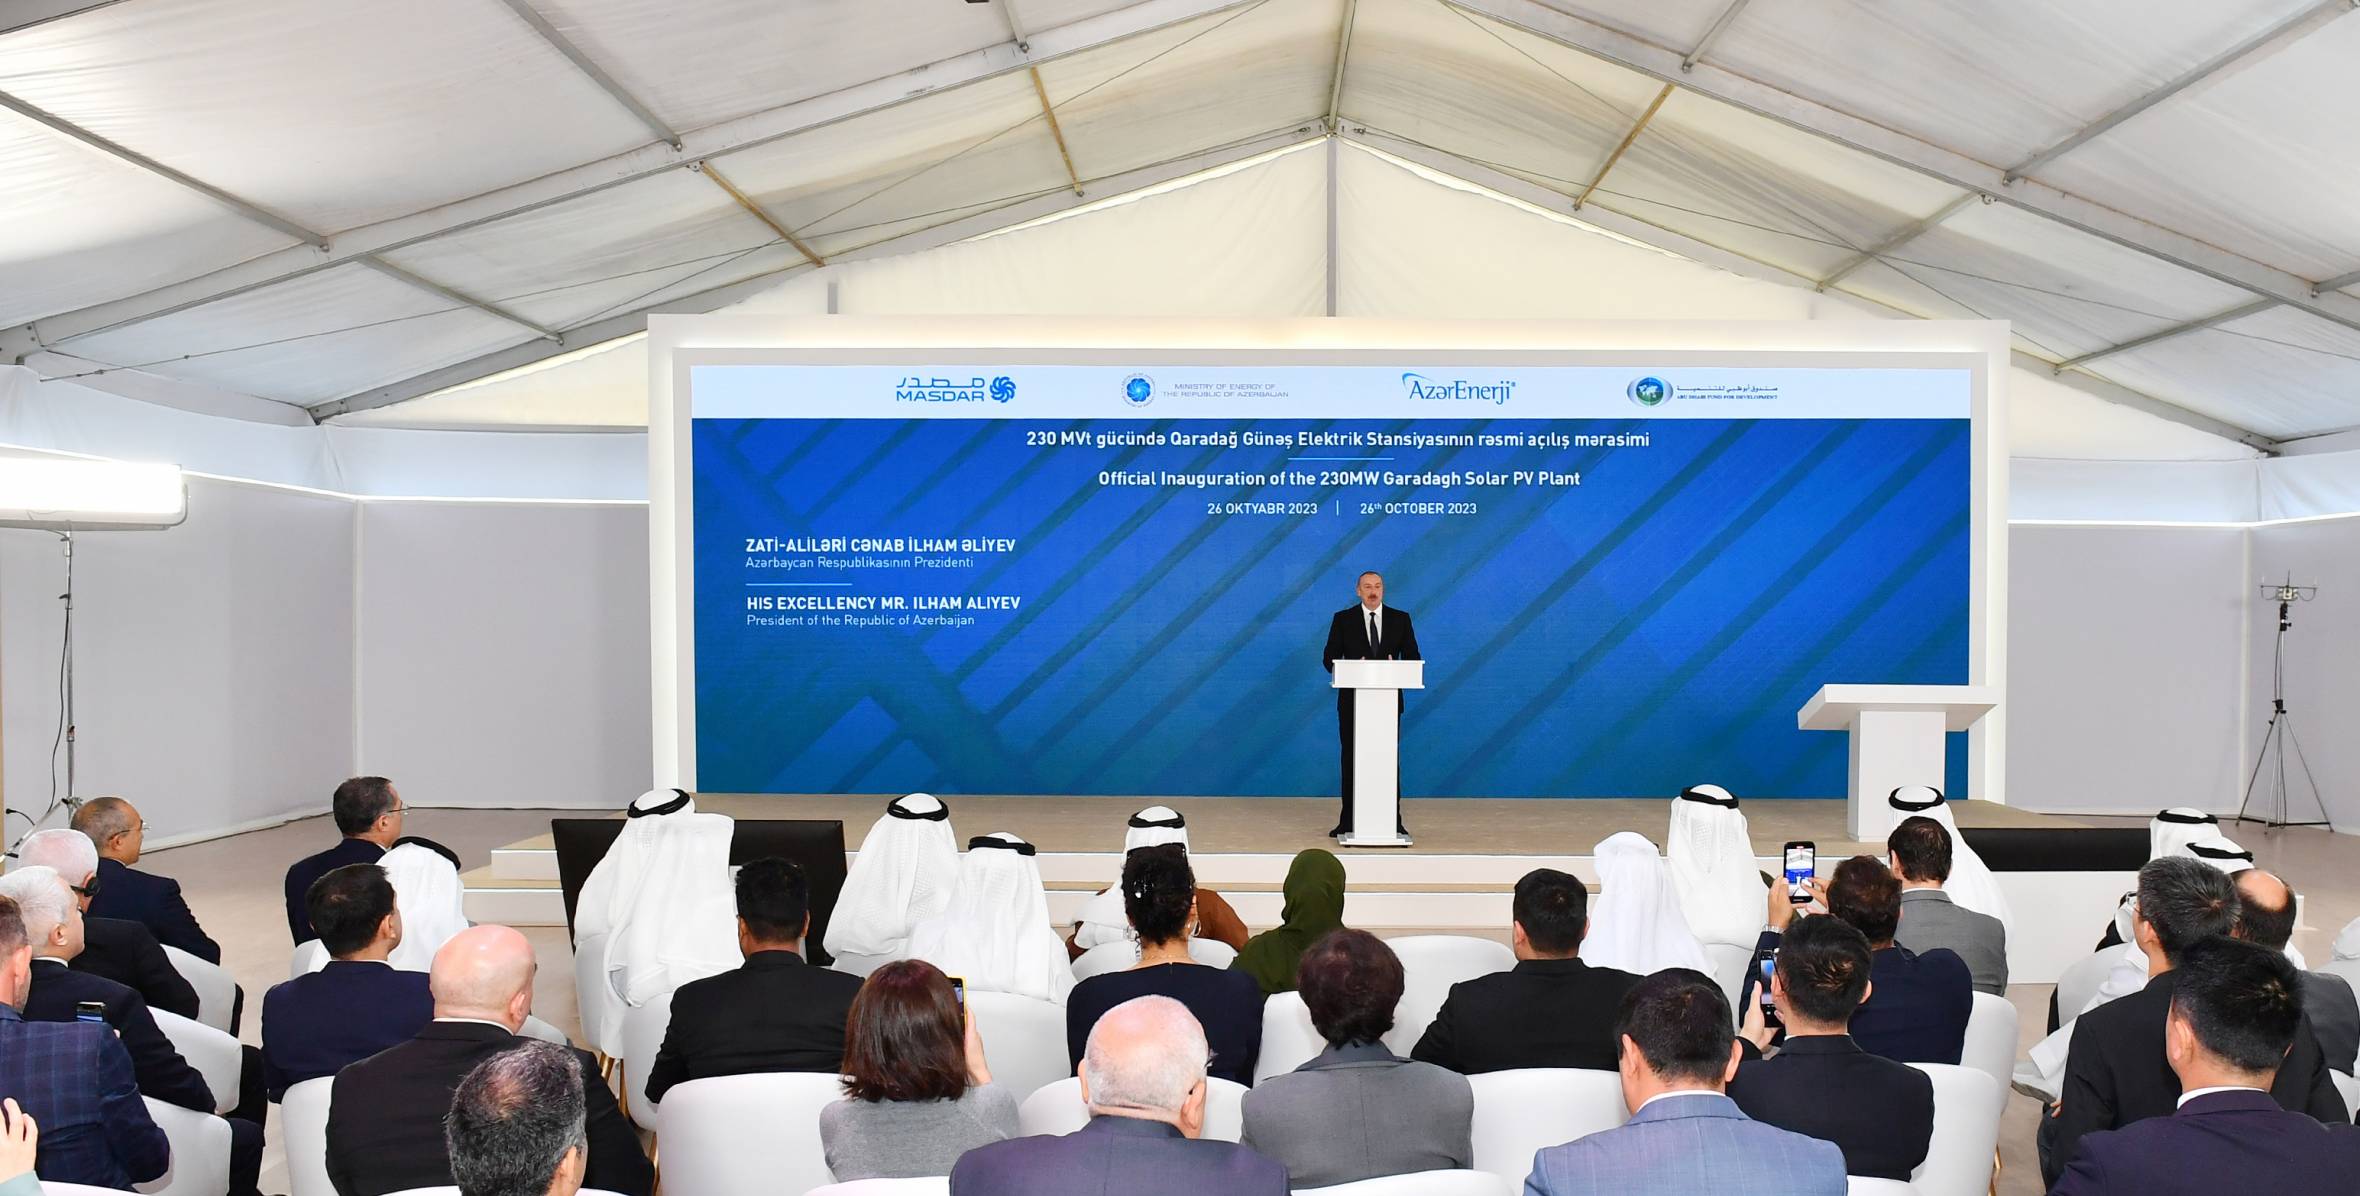 Speech by Ilham Aliyev at the official opening ceremony of 230 MW Garadagh Solar Power Plant